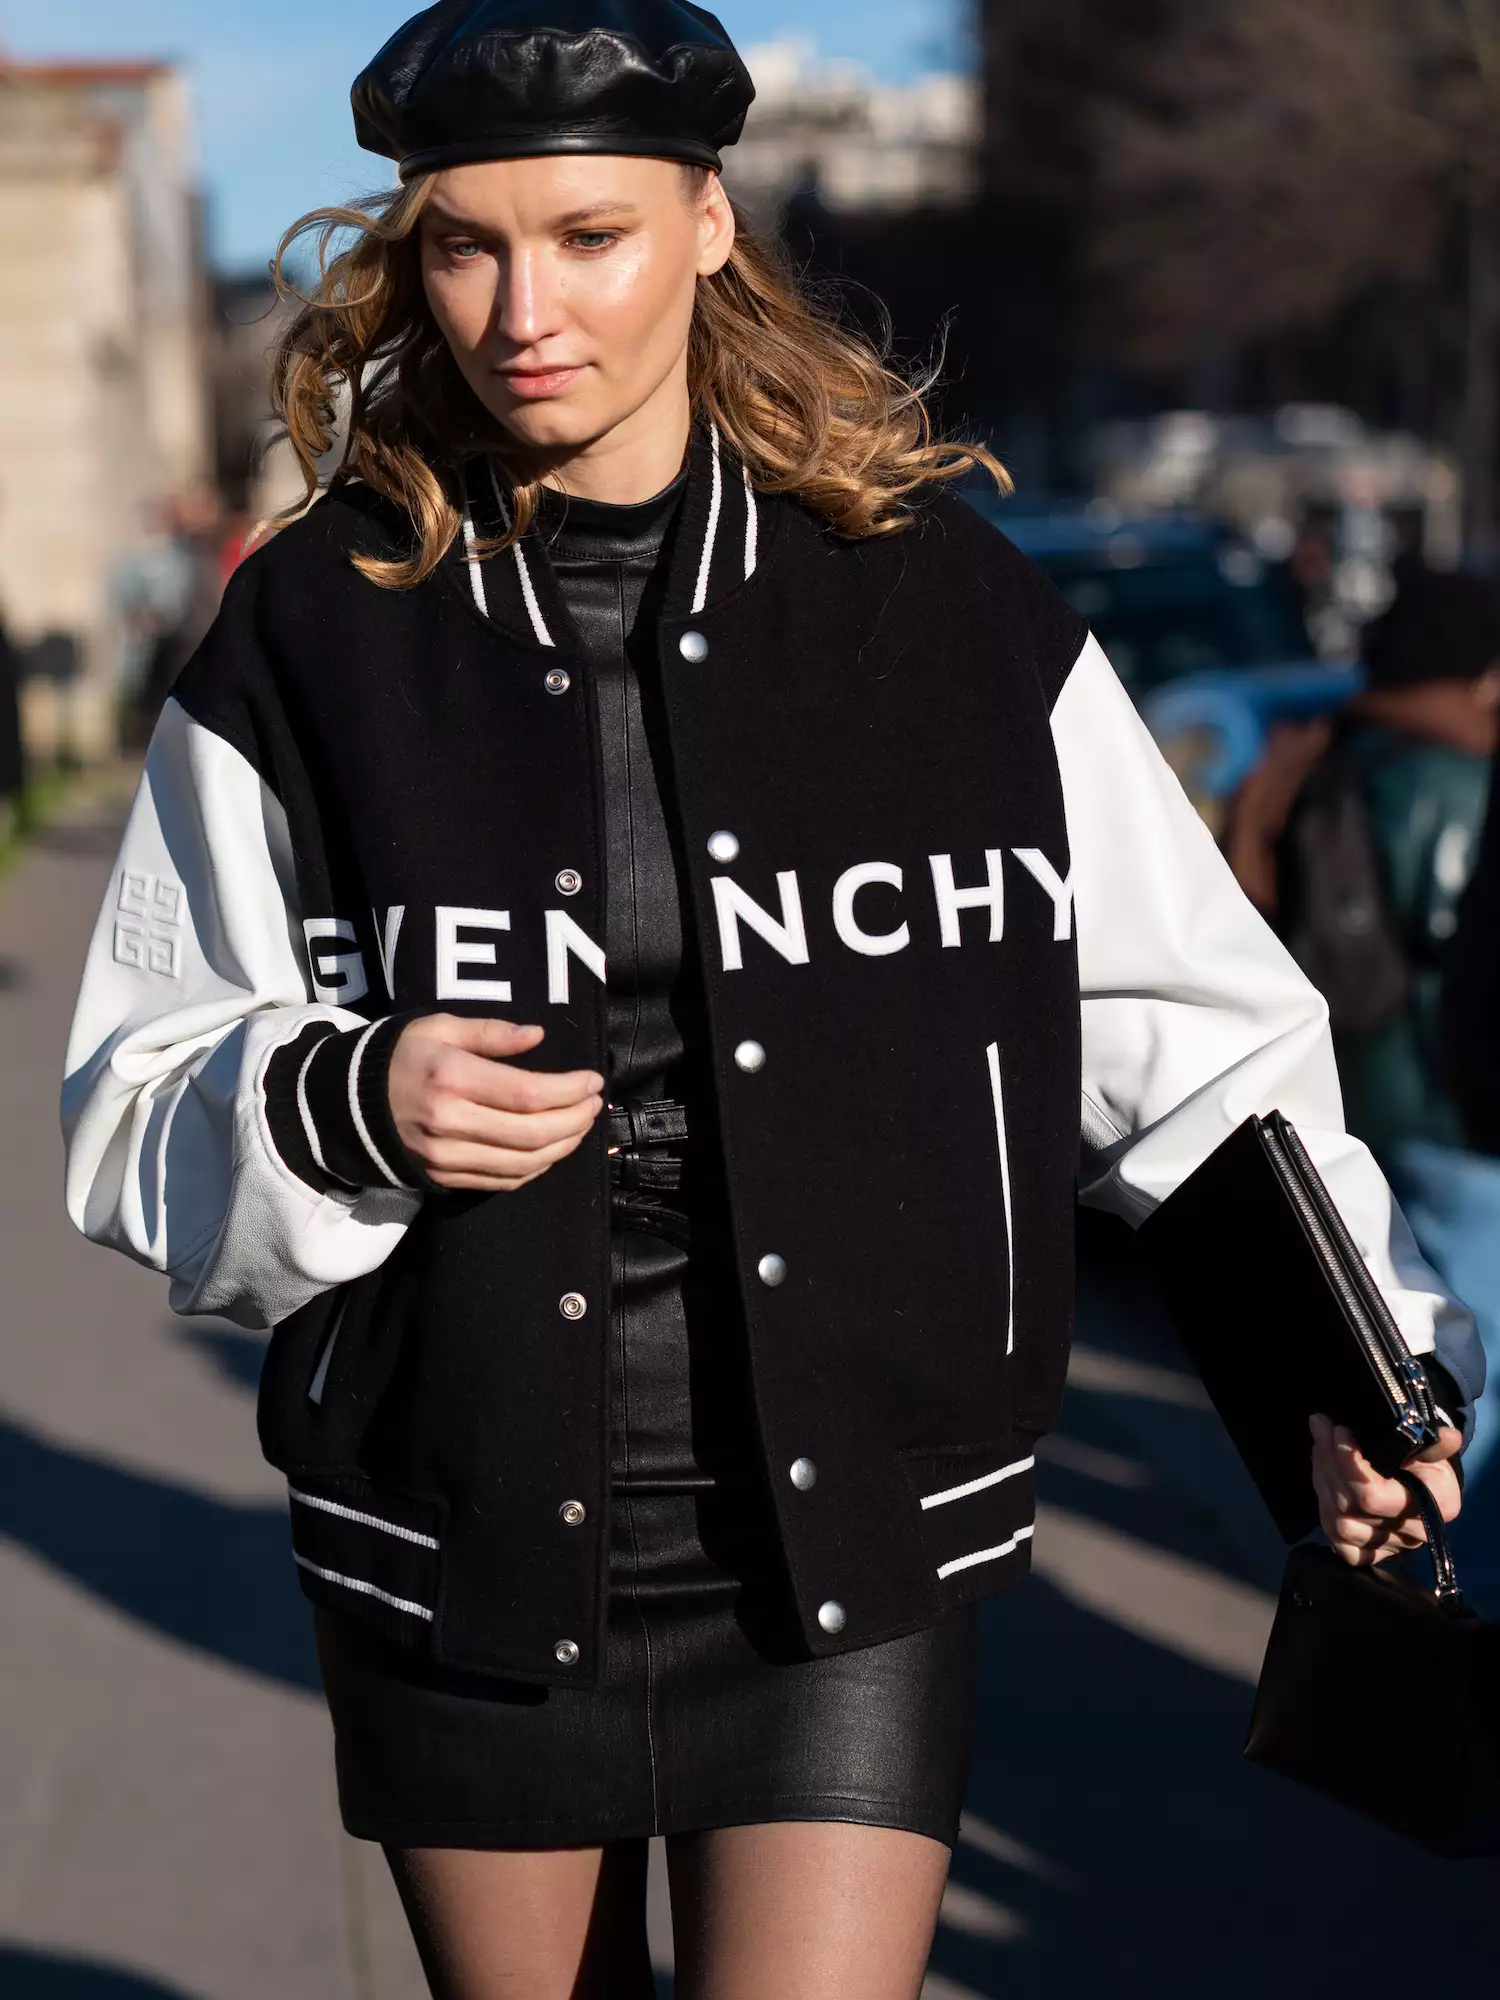 Woman wears black and white Givenchy varsity jacket, black mini dress, clutch, and beret